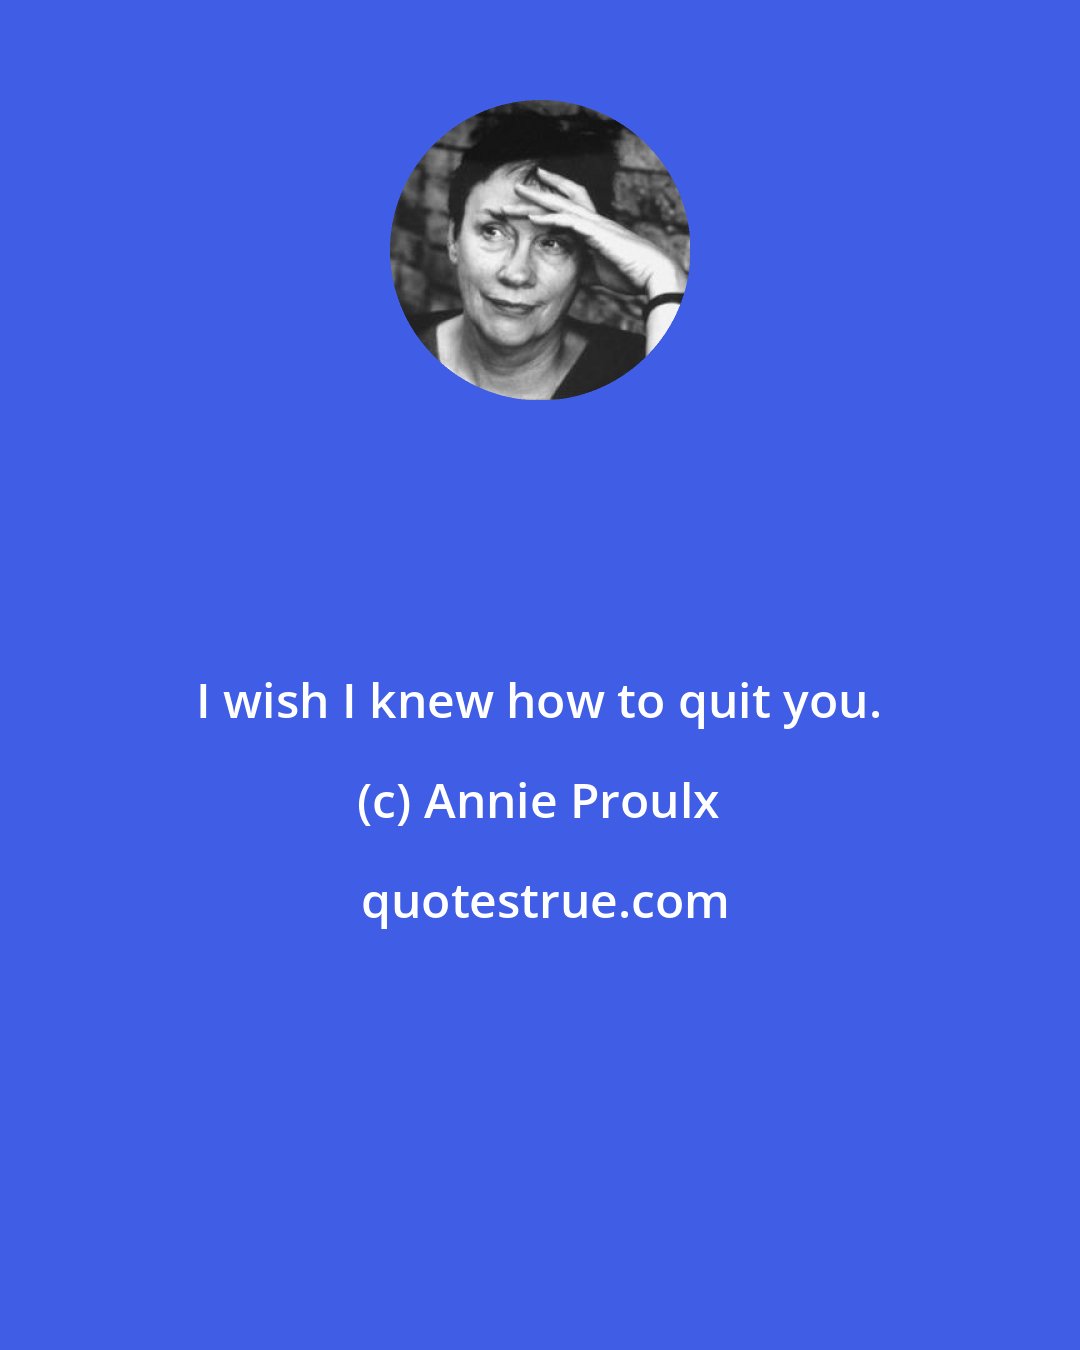 Annie Proulx: I wish I knew how to quit you.